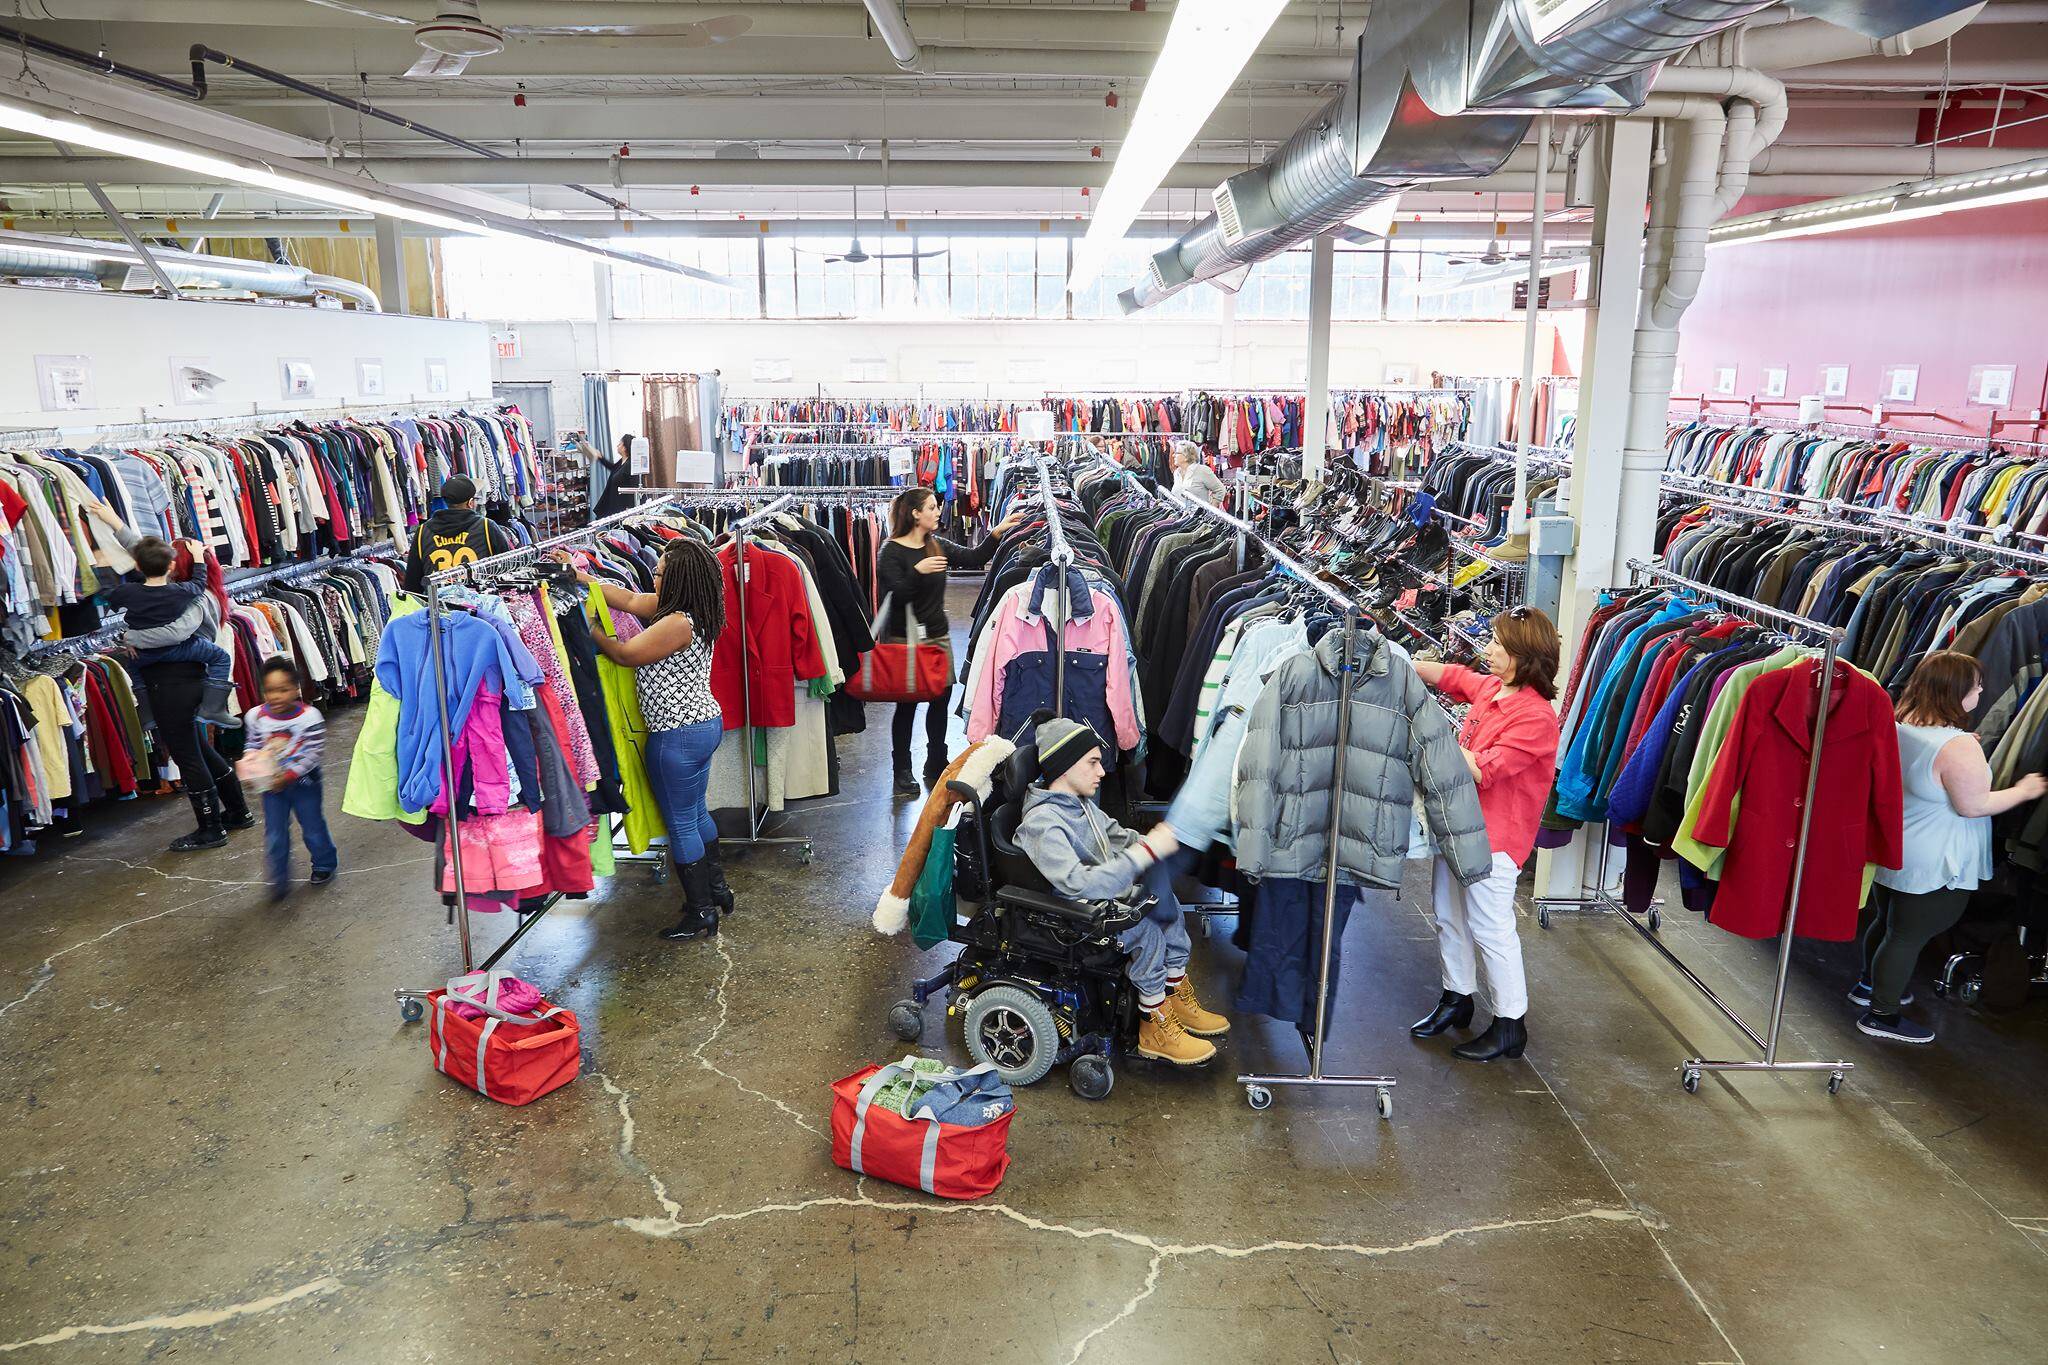 https://media.blogto.com/articles/20190121-used-clothing-toronto.jpg?w=2048&cmd=resize_then_crop&height=1365&quality=70